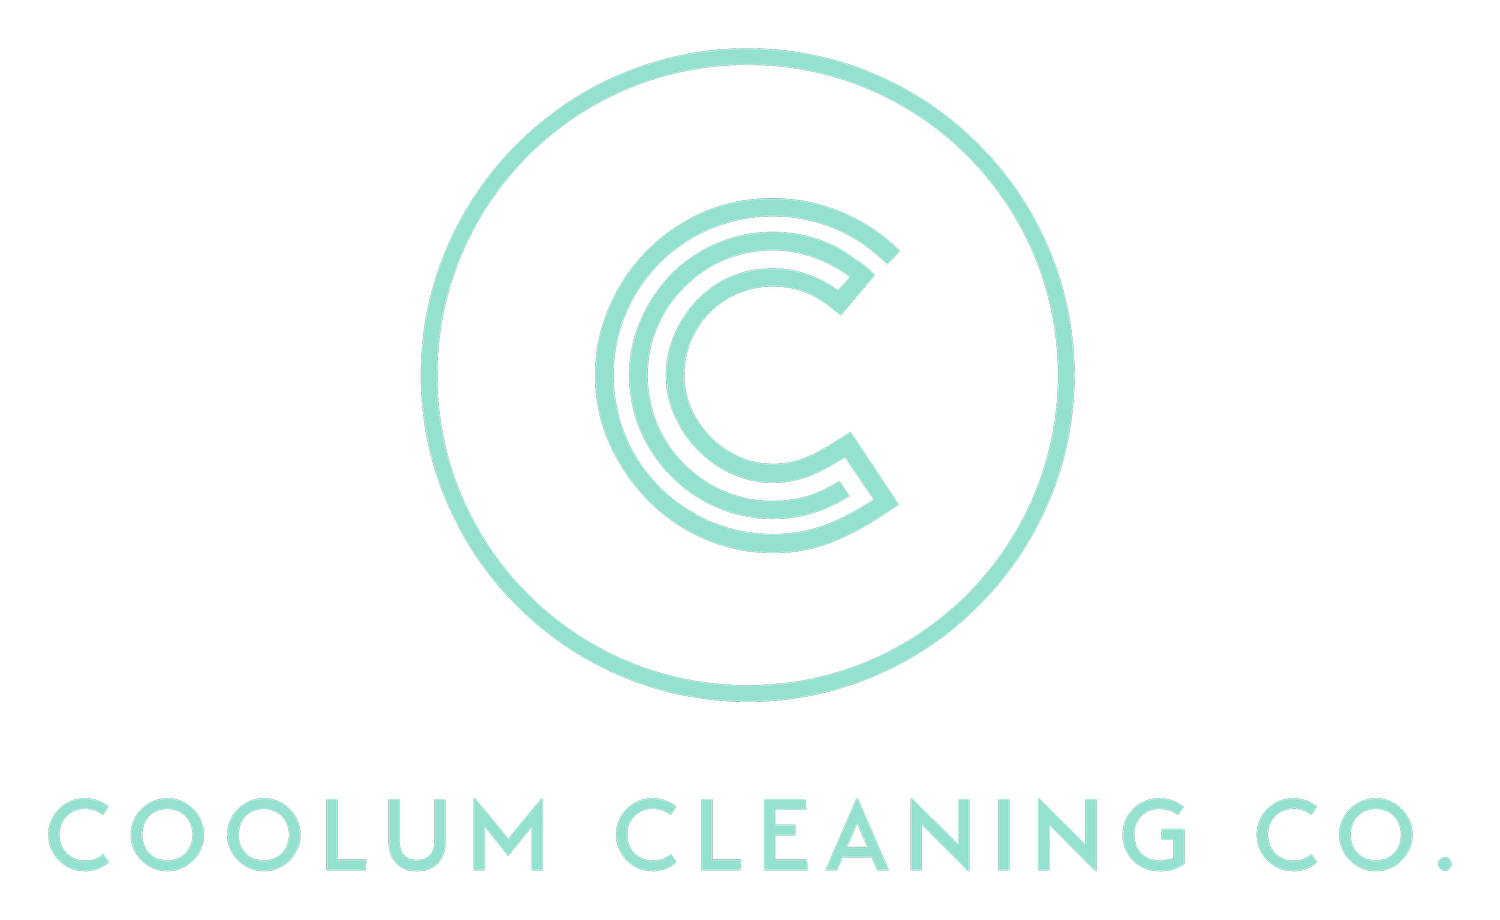 Coolum Cleaning Co.